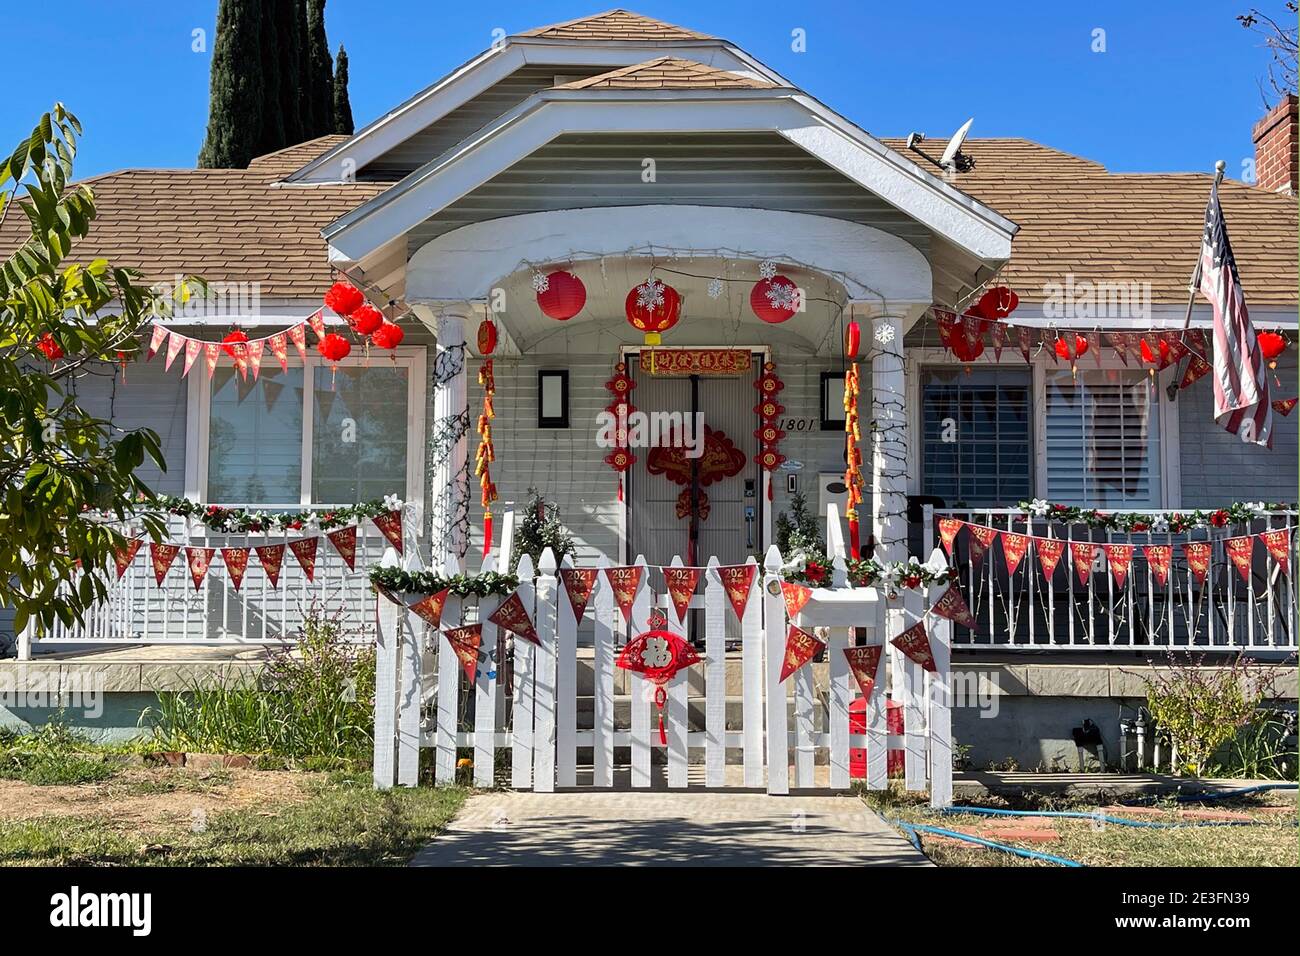 A house with Chinese New Year decorations, Monday, Jan. 18, 2021, in Alhambra, Calif. Stock Photo